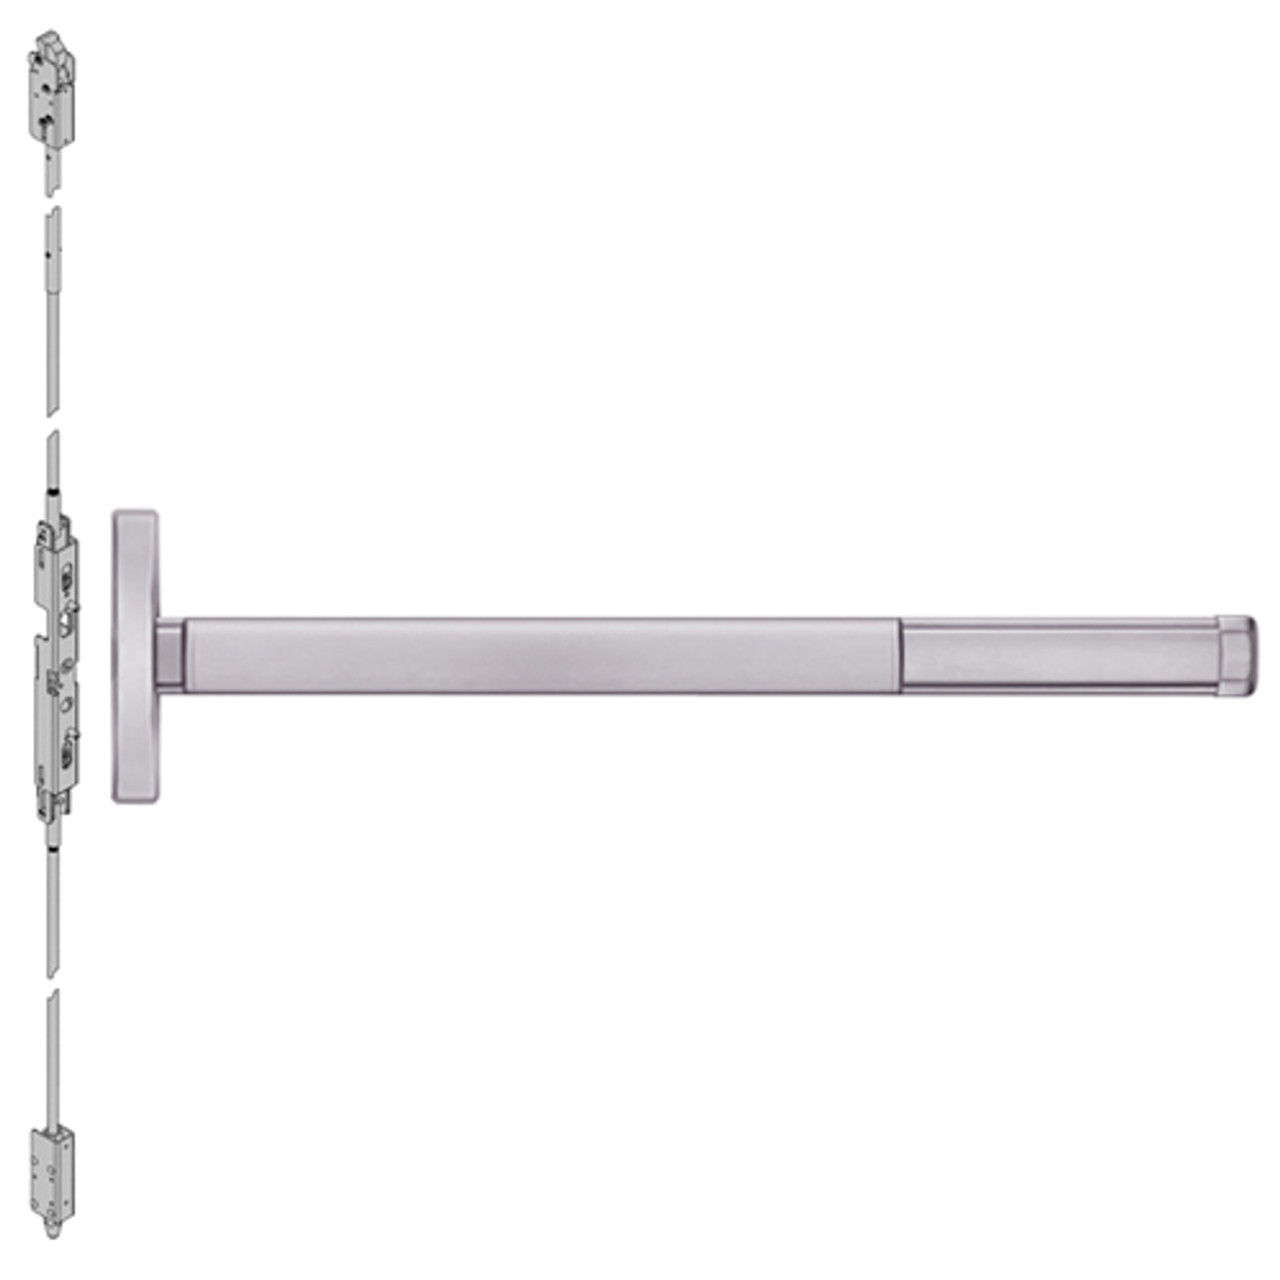 2608LBRCD-630-48 PHI 2600 Series Non Fire Rated Concealed Vertical Rod Exit Device Prepped for Key Controls Lever with Cylinder Dogging and LBR in Satin Stainless Steel Finish